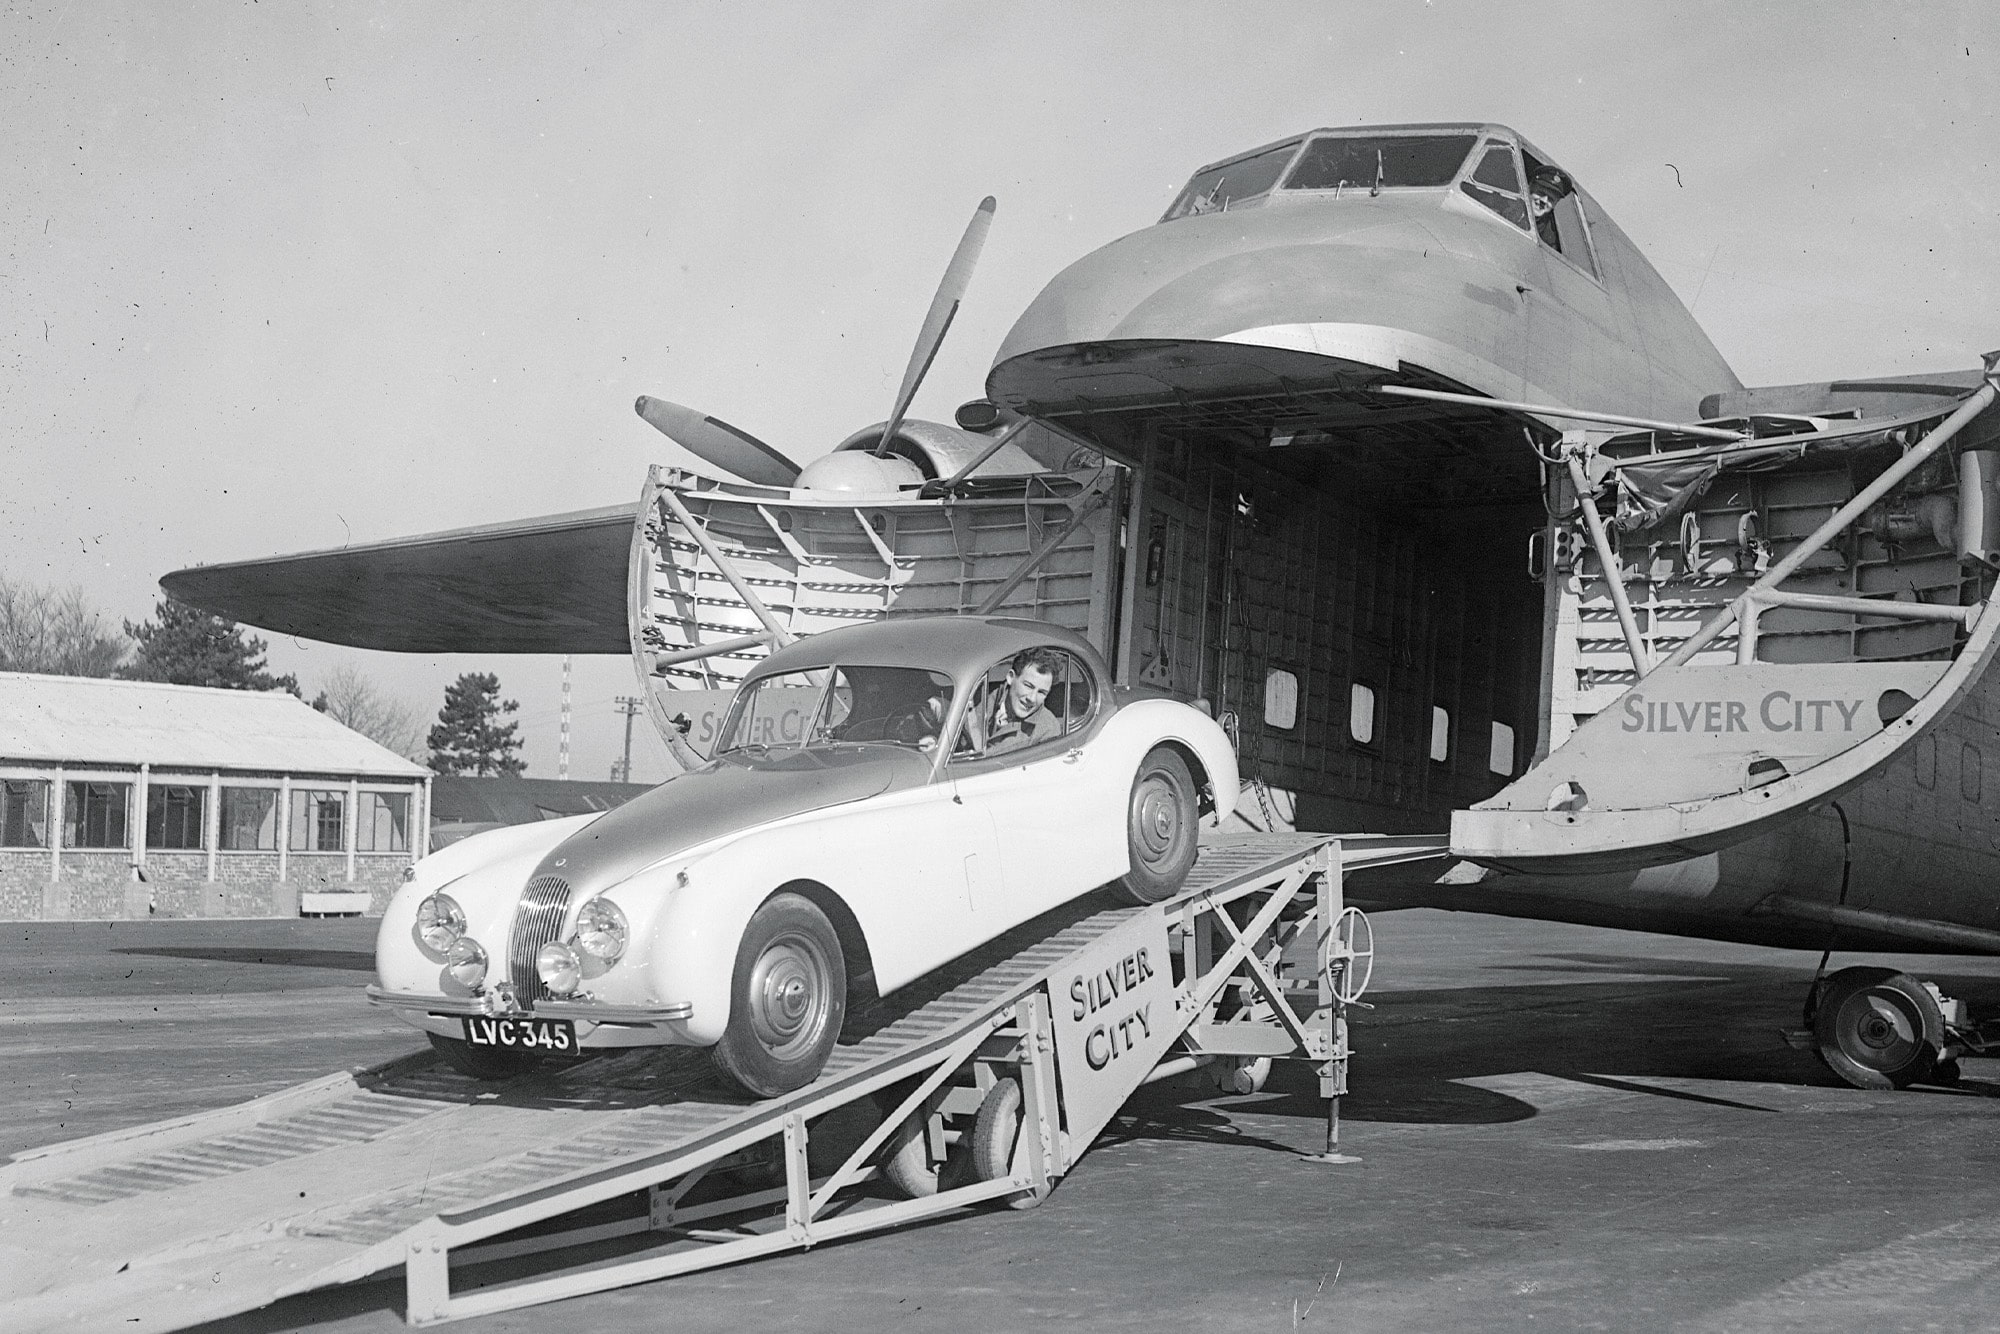 Stirling Moss drives a Jaguar XK120 out of the nose of a cargo plane